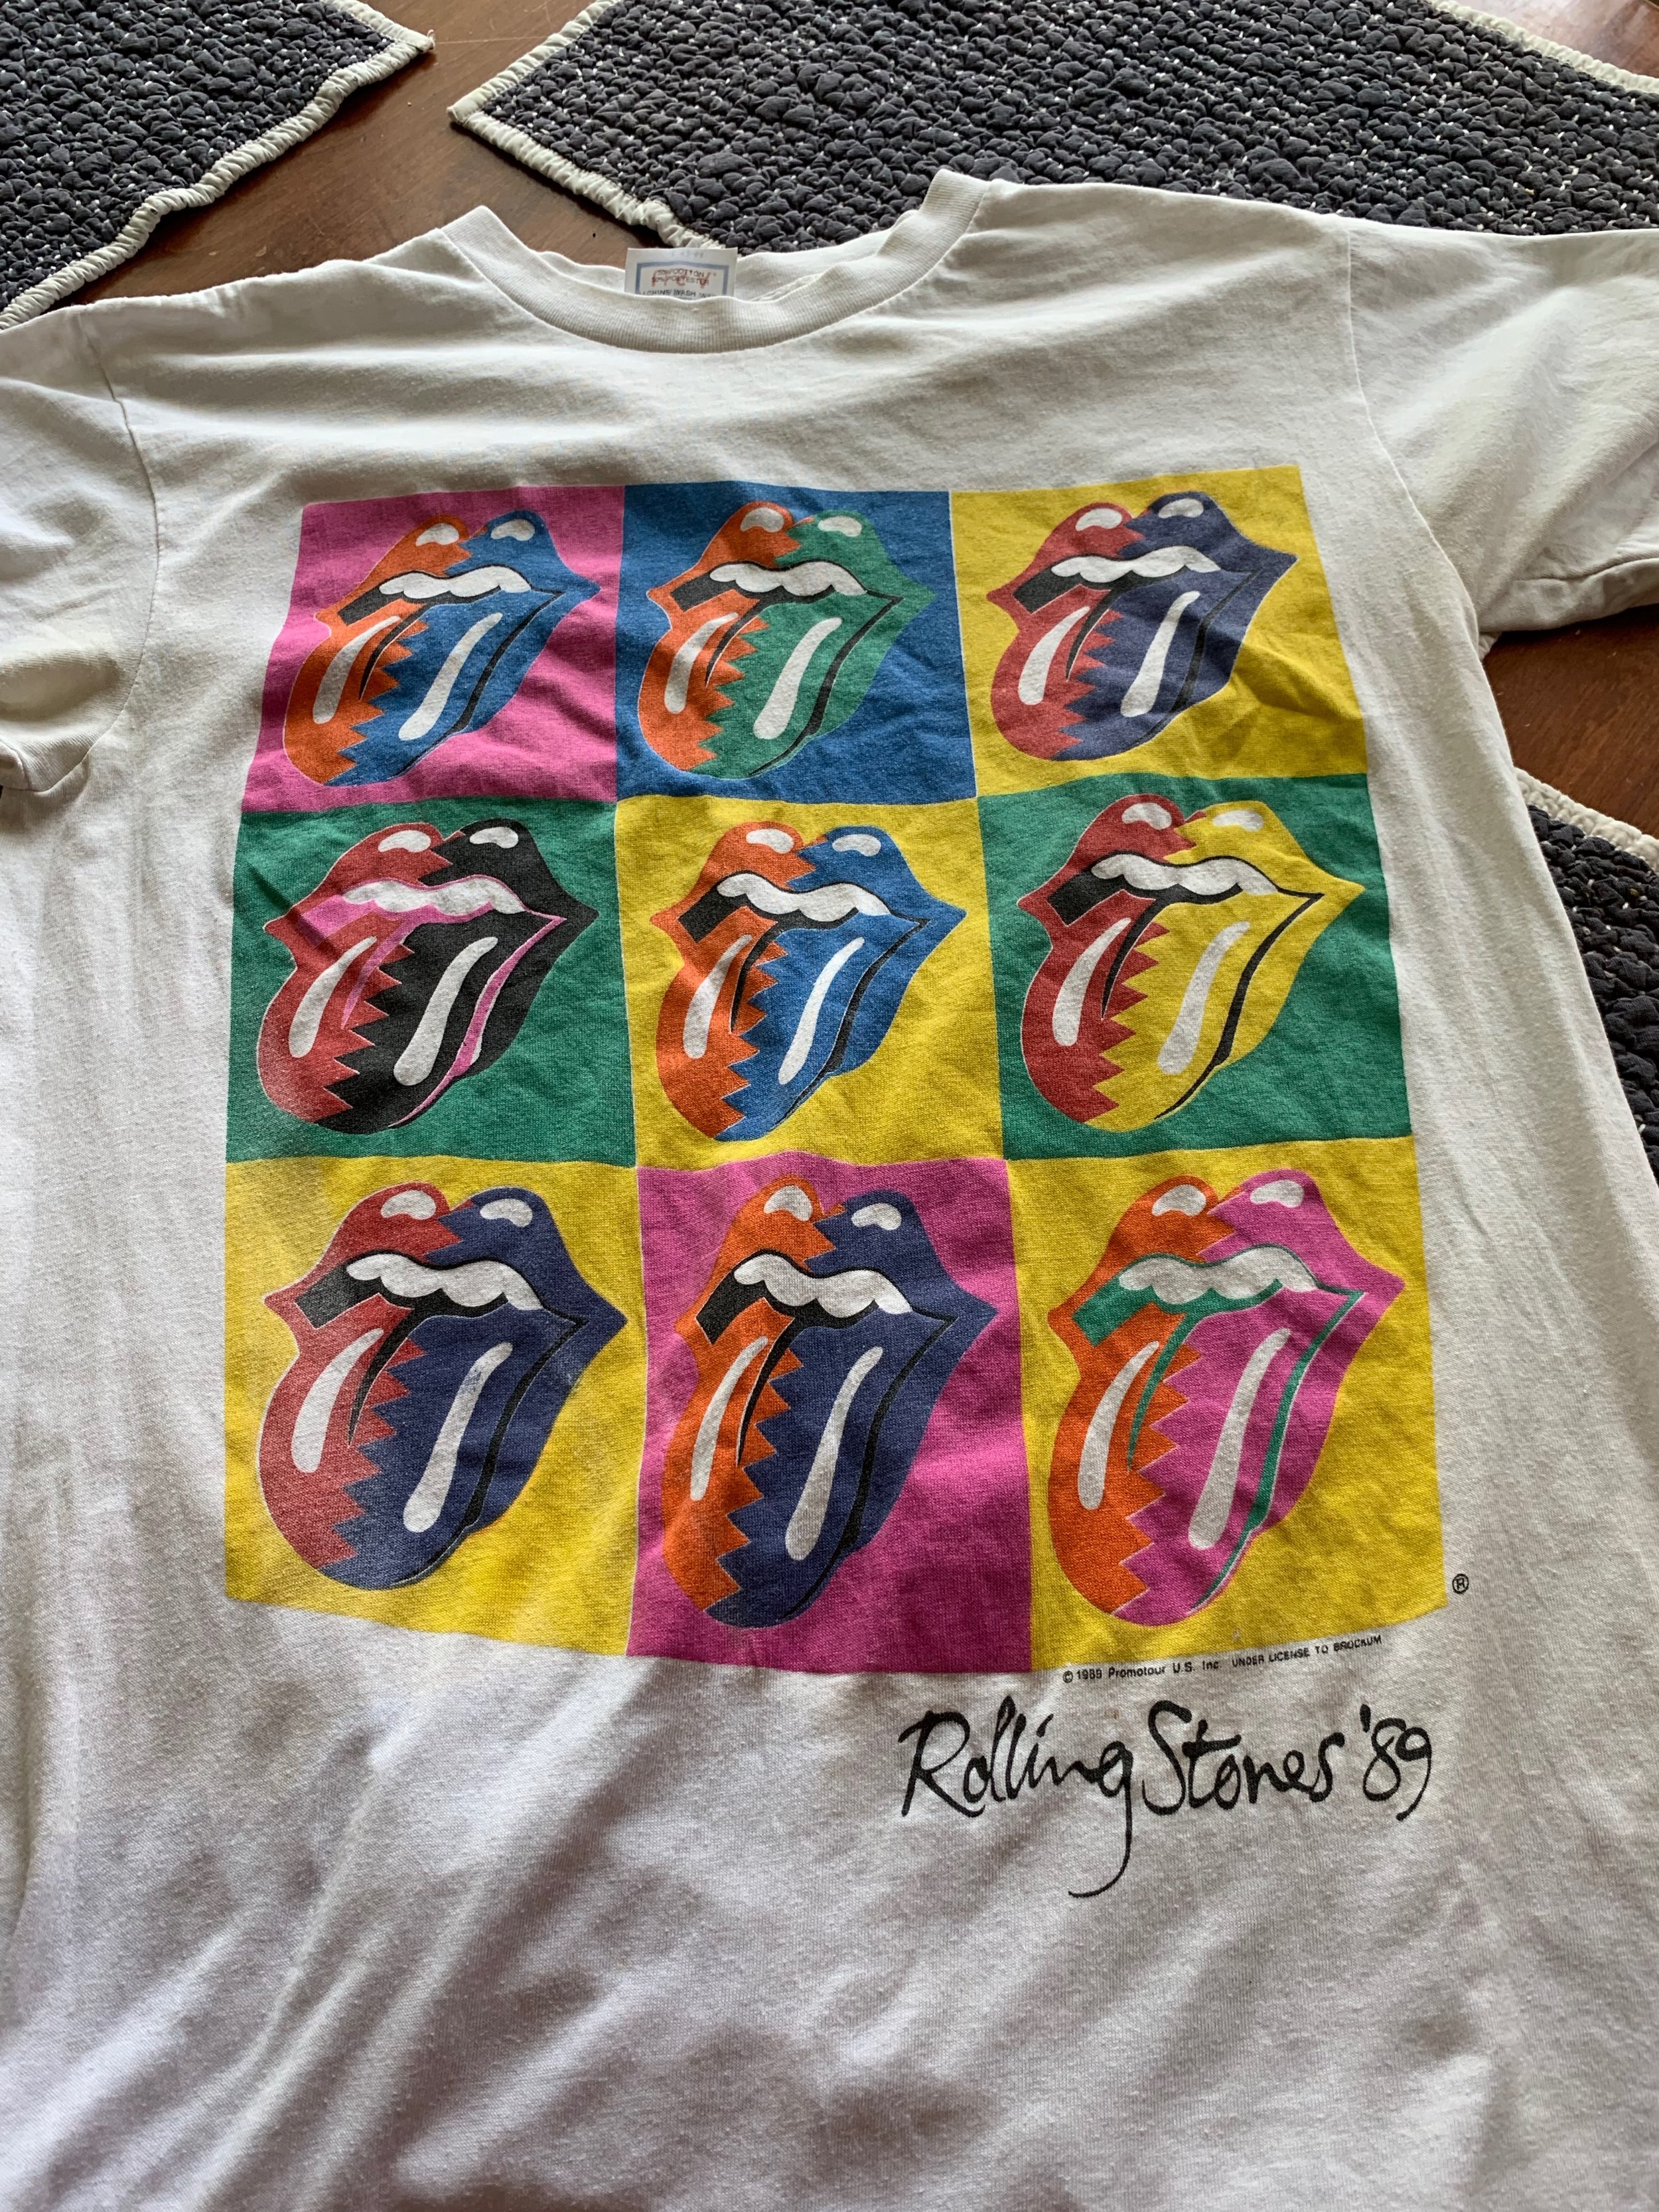 My t-shirt from the Rolling Stones “Steel Wheels” Tour in 1989. 